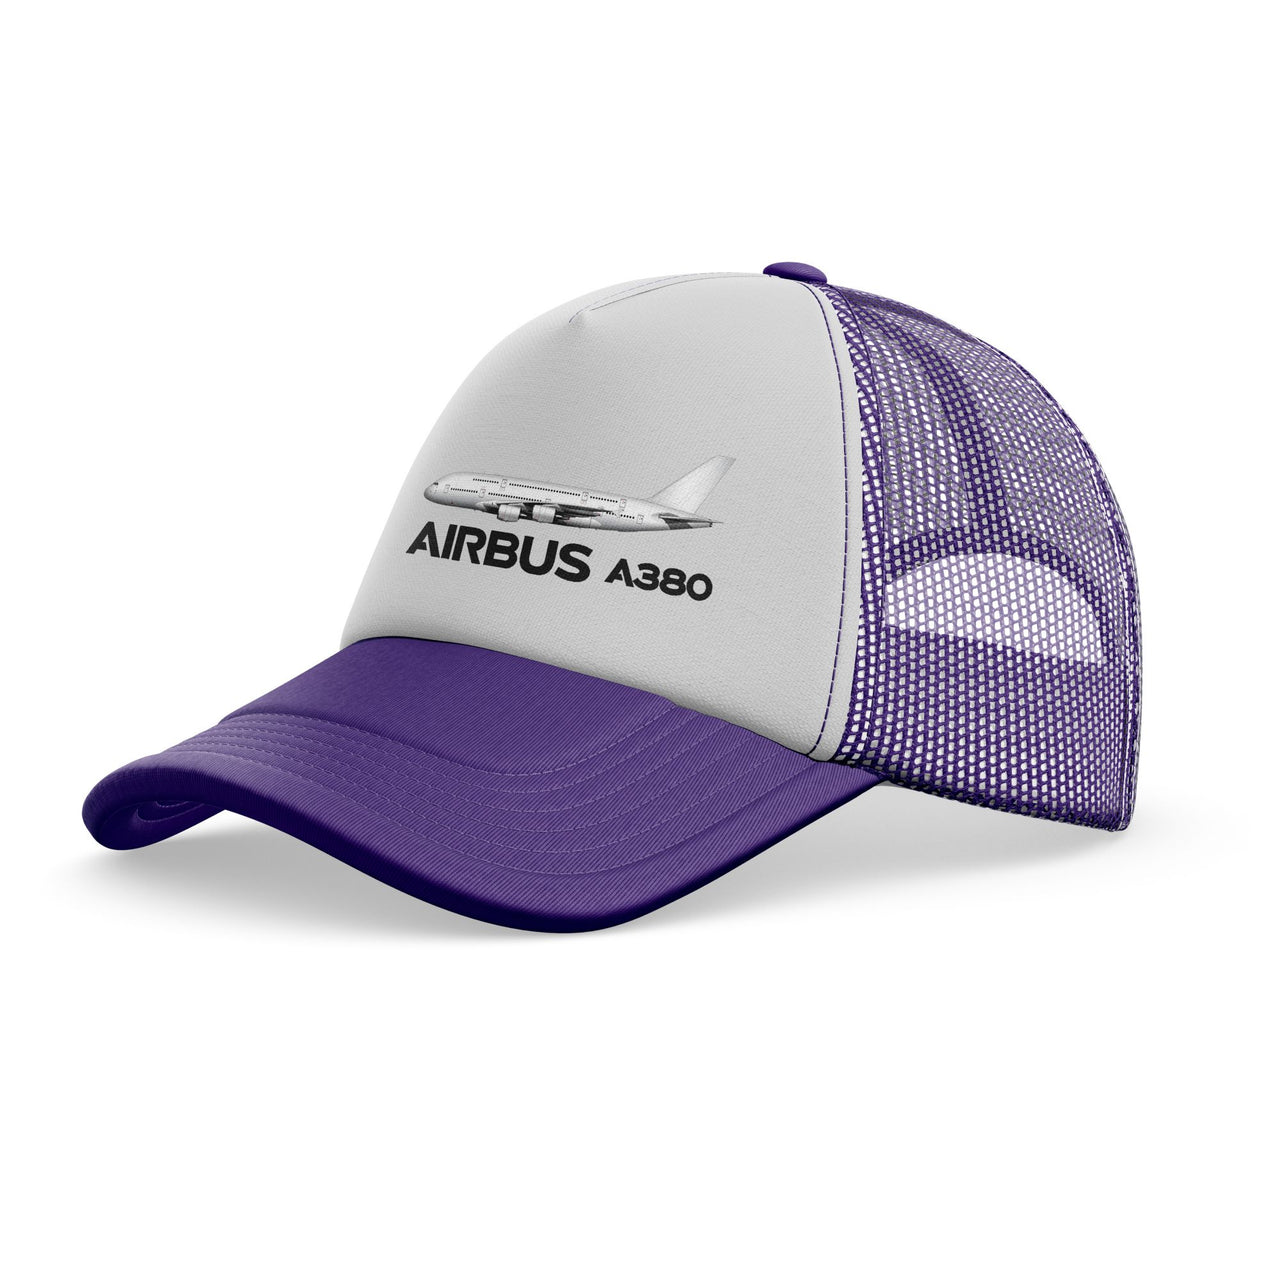 The Airbus A380 Designed Trucker Caps & Hats